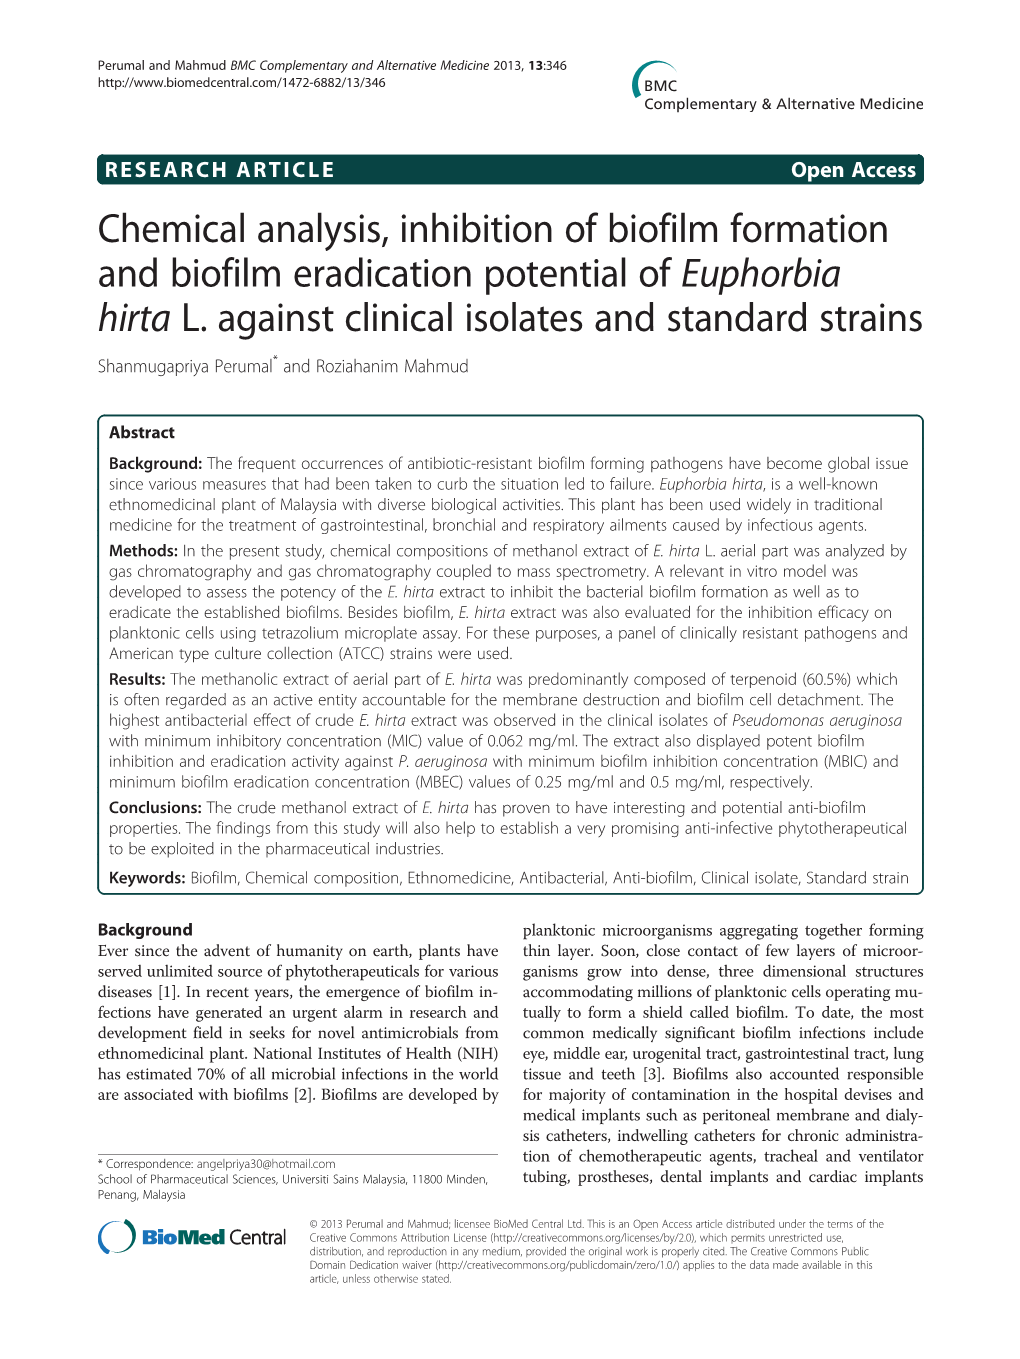 Chemical Analysis, Inhibition of Biofilm Formation and Biofilm Eradication Potential of Euphorbia Hirta L. Against Clinical Isol